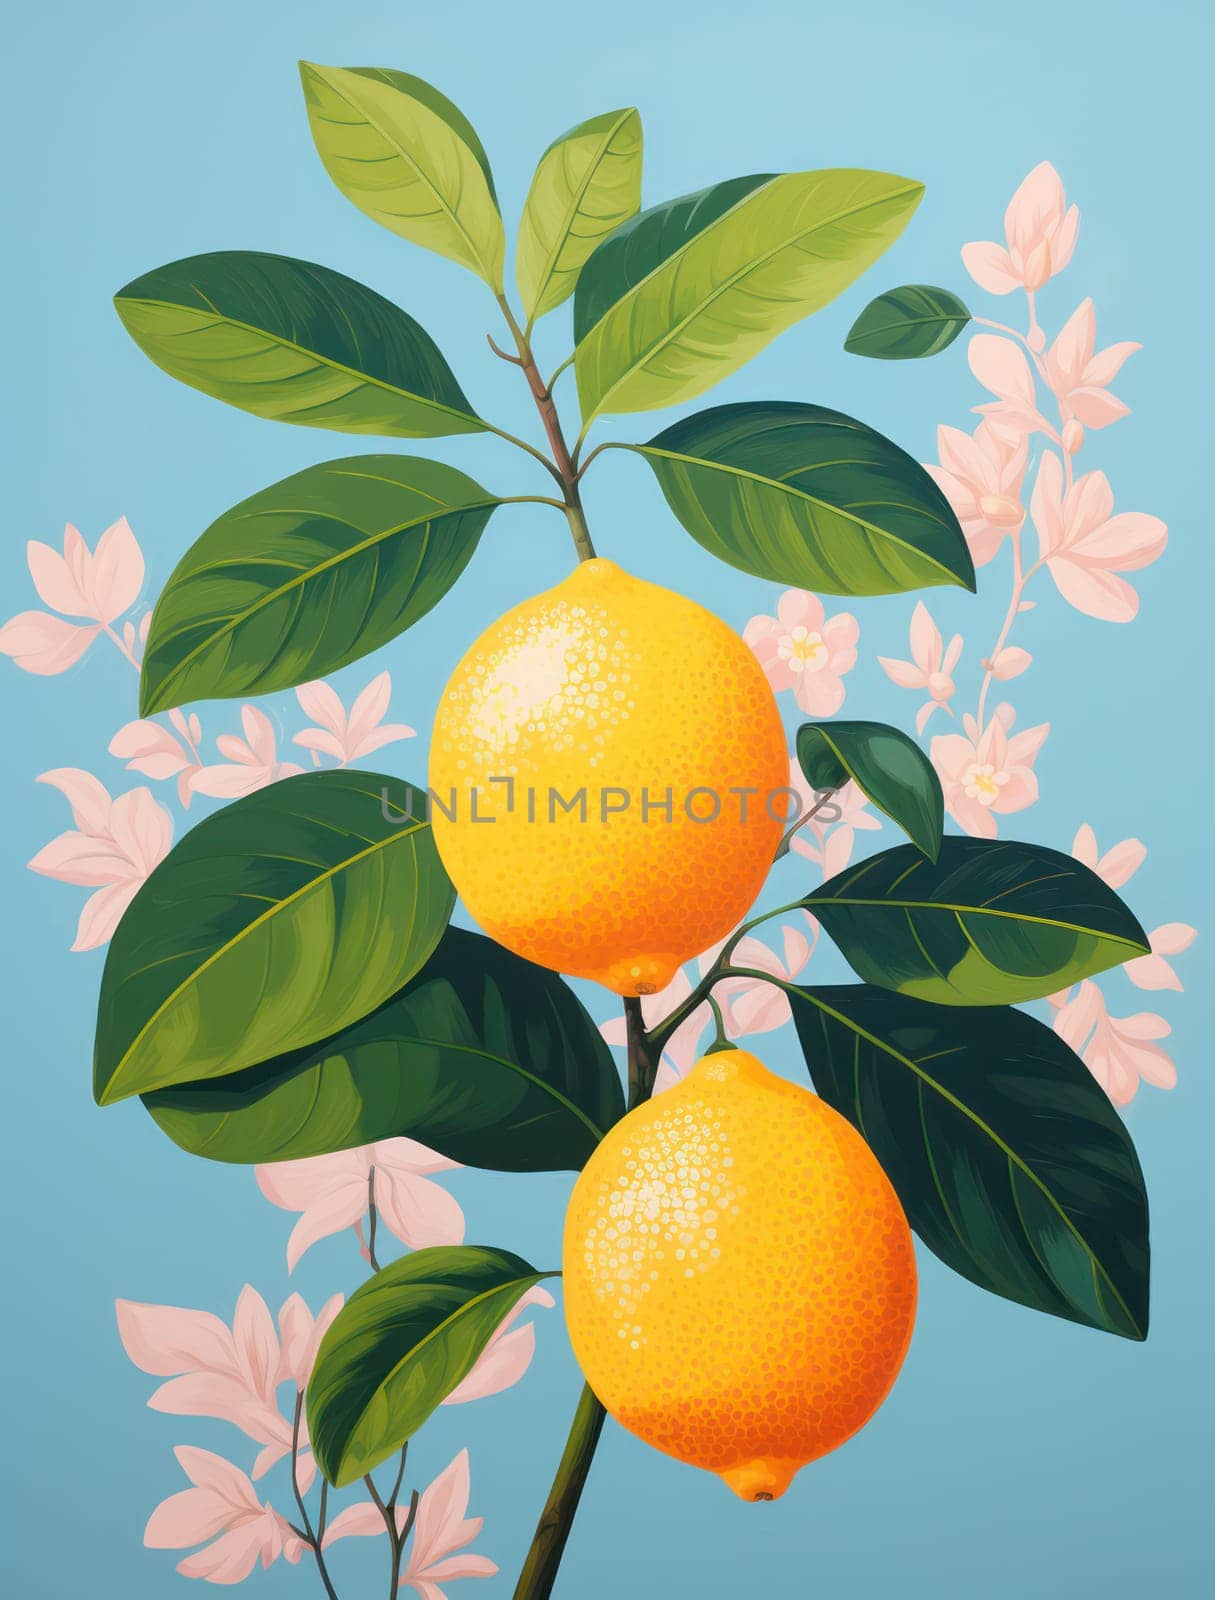 Intricate Citrus Harvest: Fresh Lemon Tree Branch with Yellow Fruits, Blossom, and Green Leaves on a Seamless Tropical Background by Vichizh